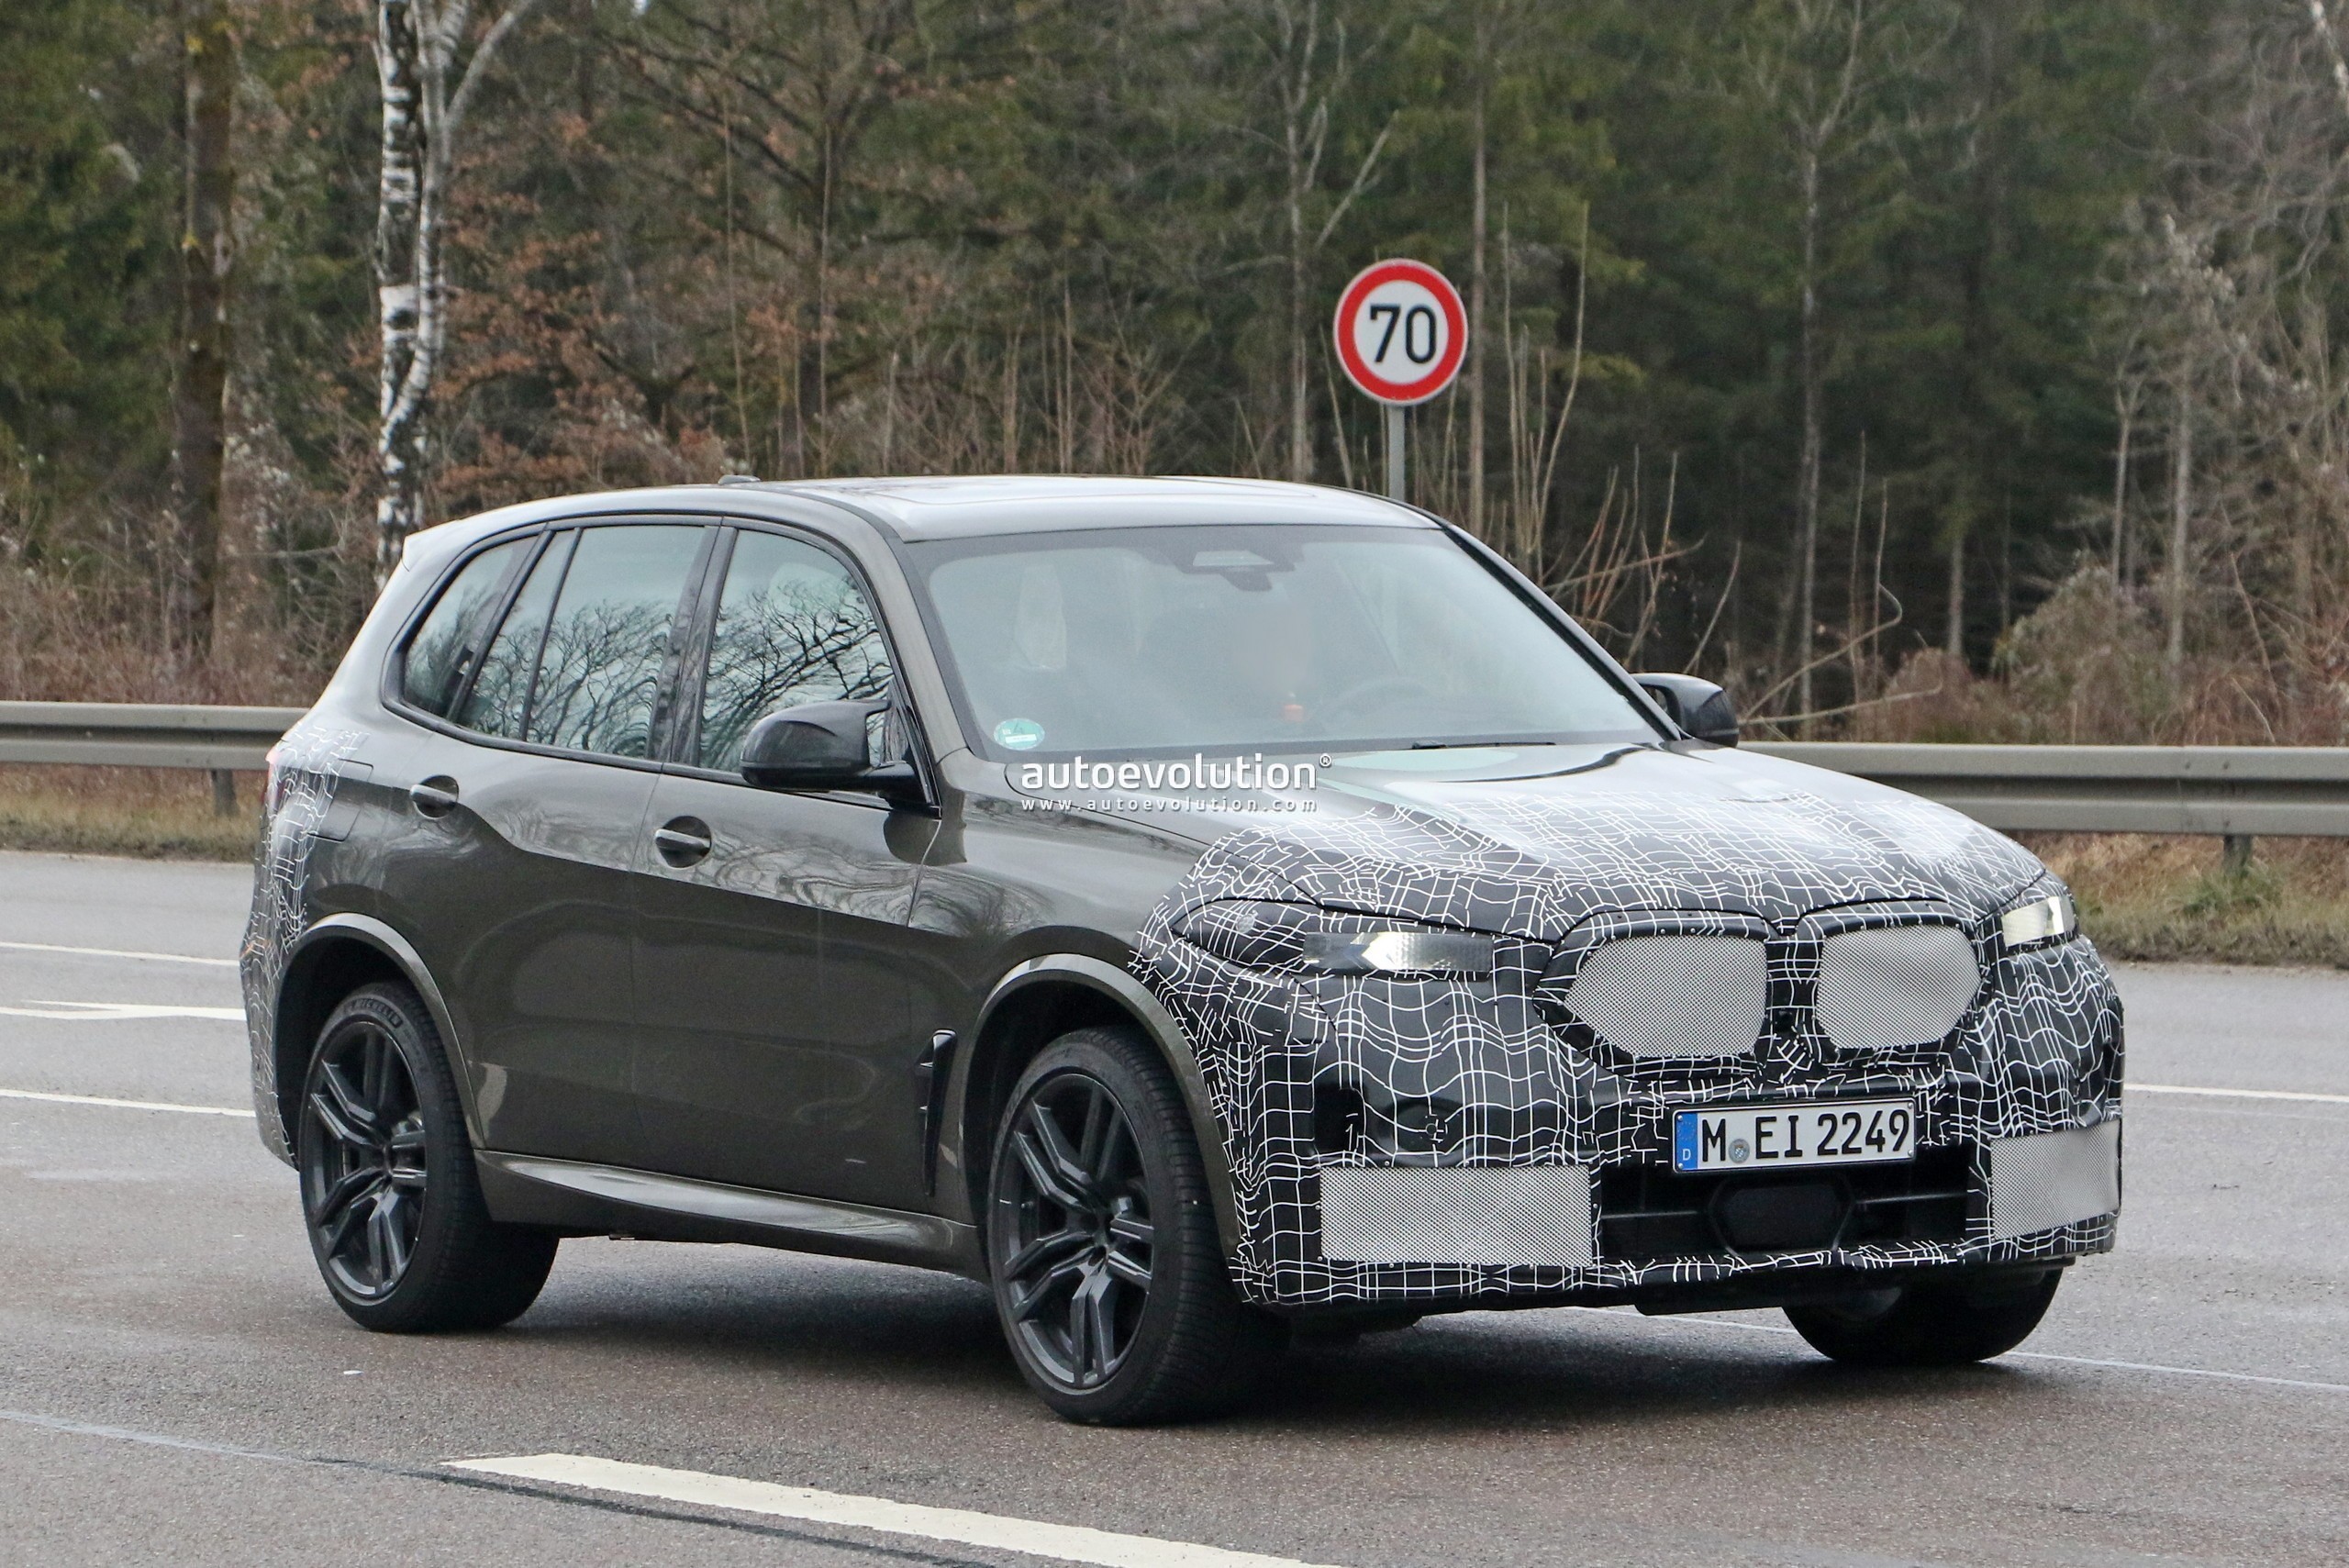 G05 BMW X5 M LCI Makes Surprise Appearance With Almost No Camouflage on the  Body - autoevolution